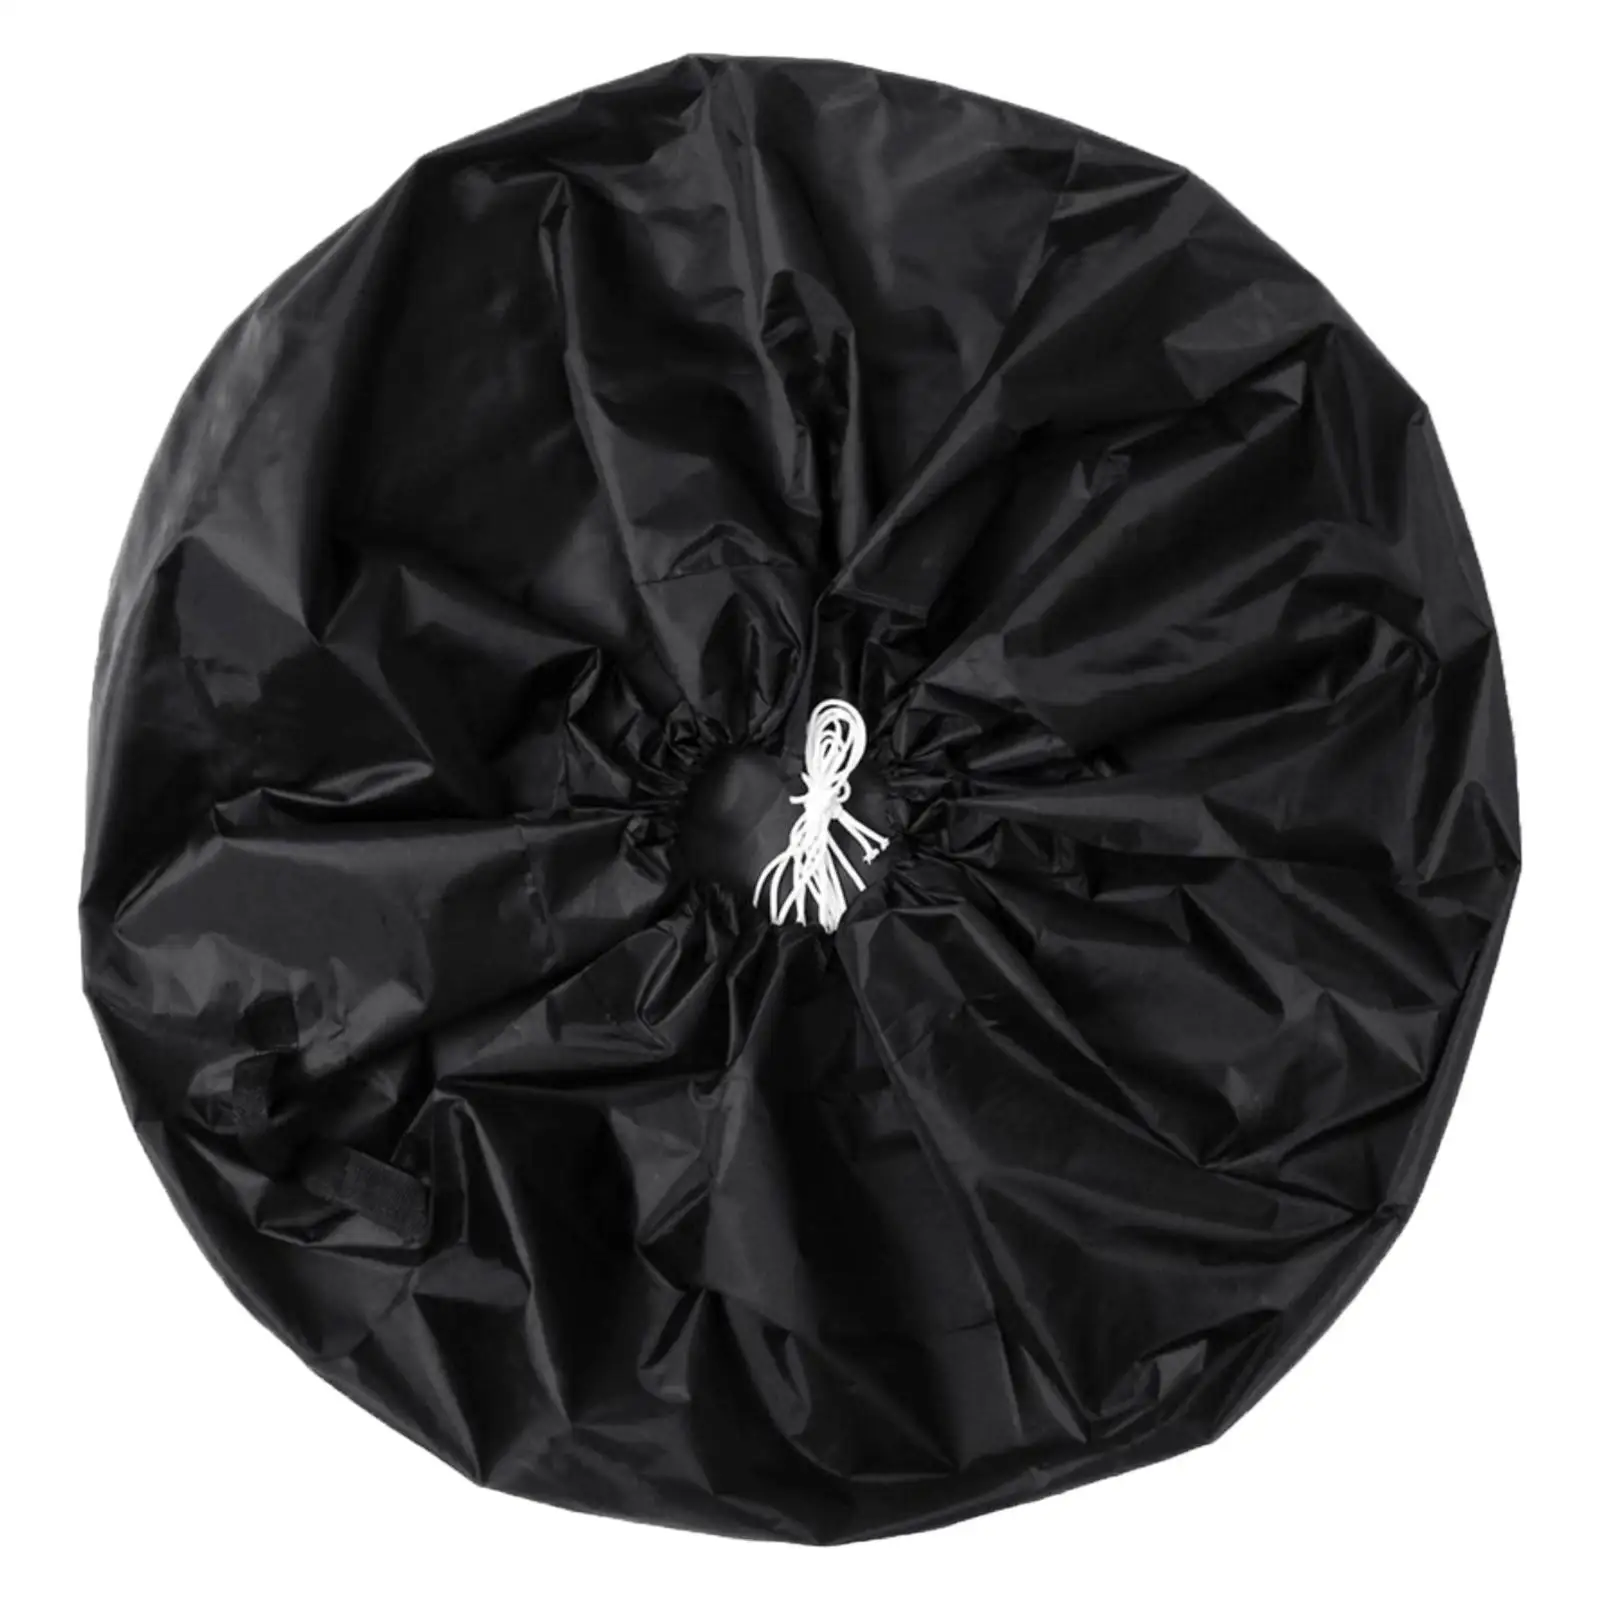 1 Package Tyre Cover Entire Black Protective  Overall Tyre for Car